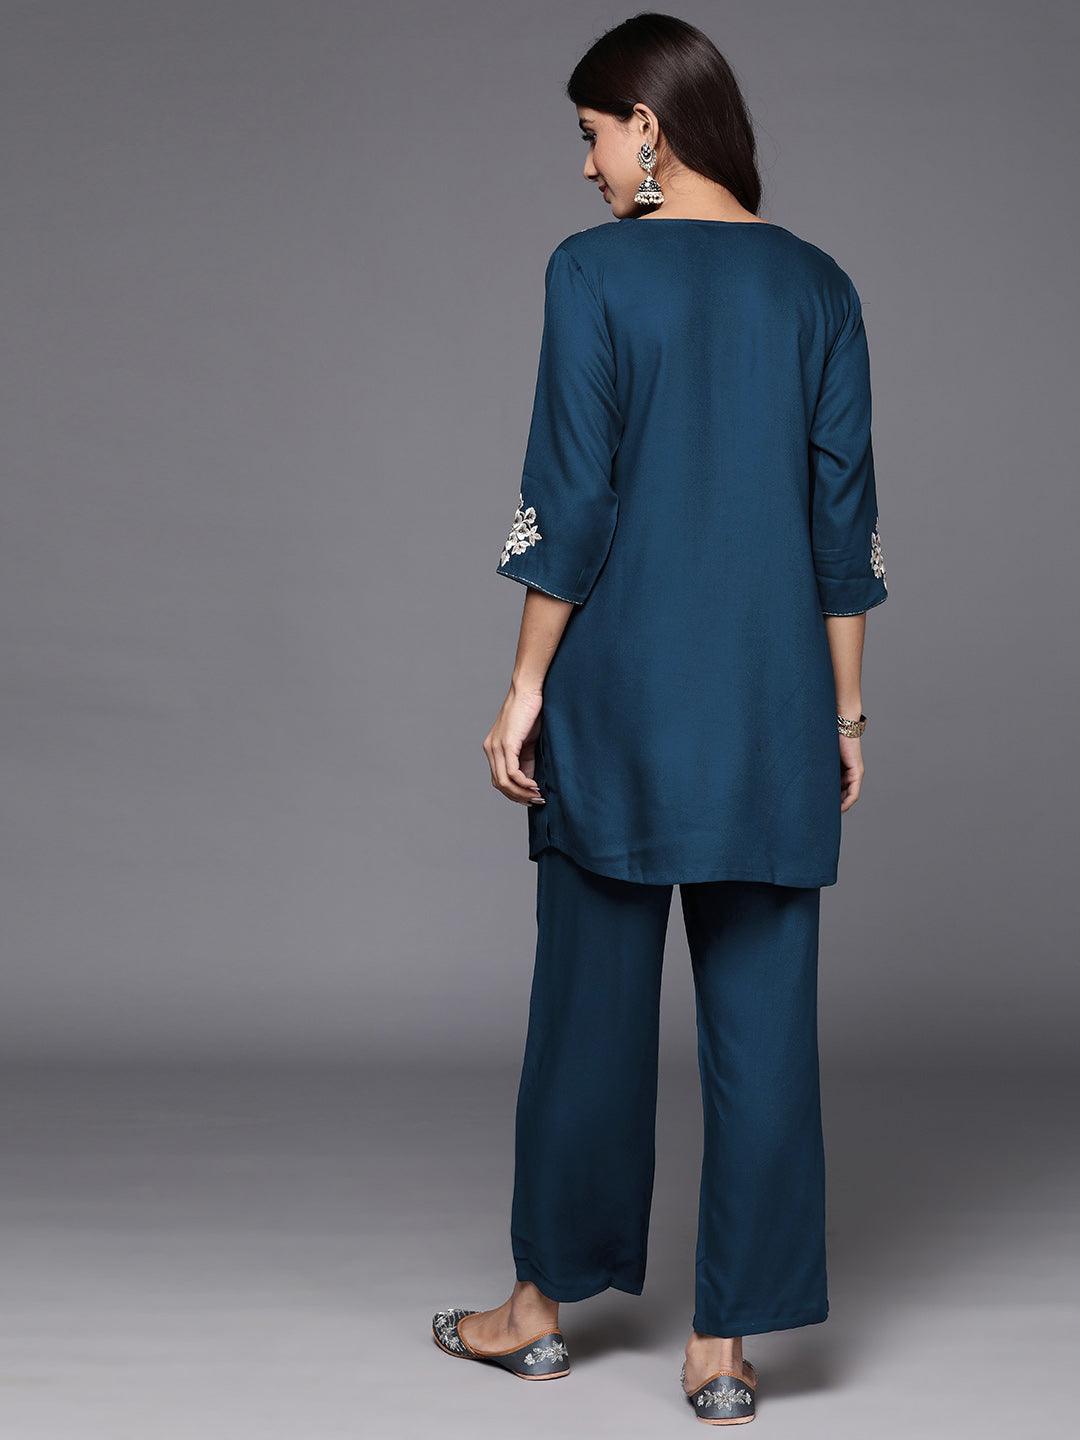 Teal Self Design Wool Blend Tunic With Trousers - Libas